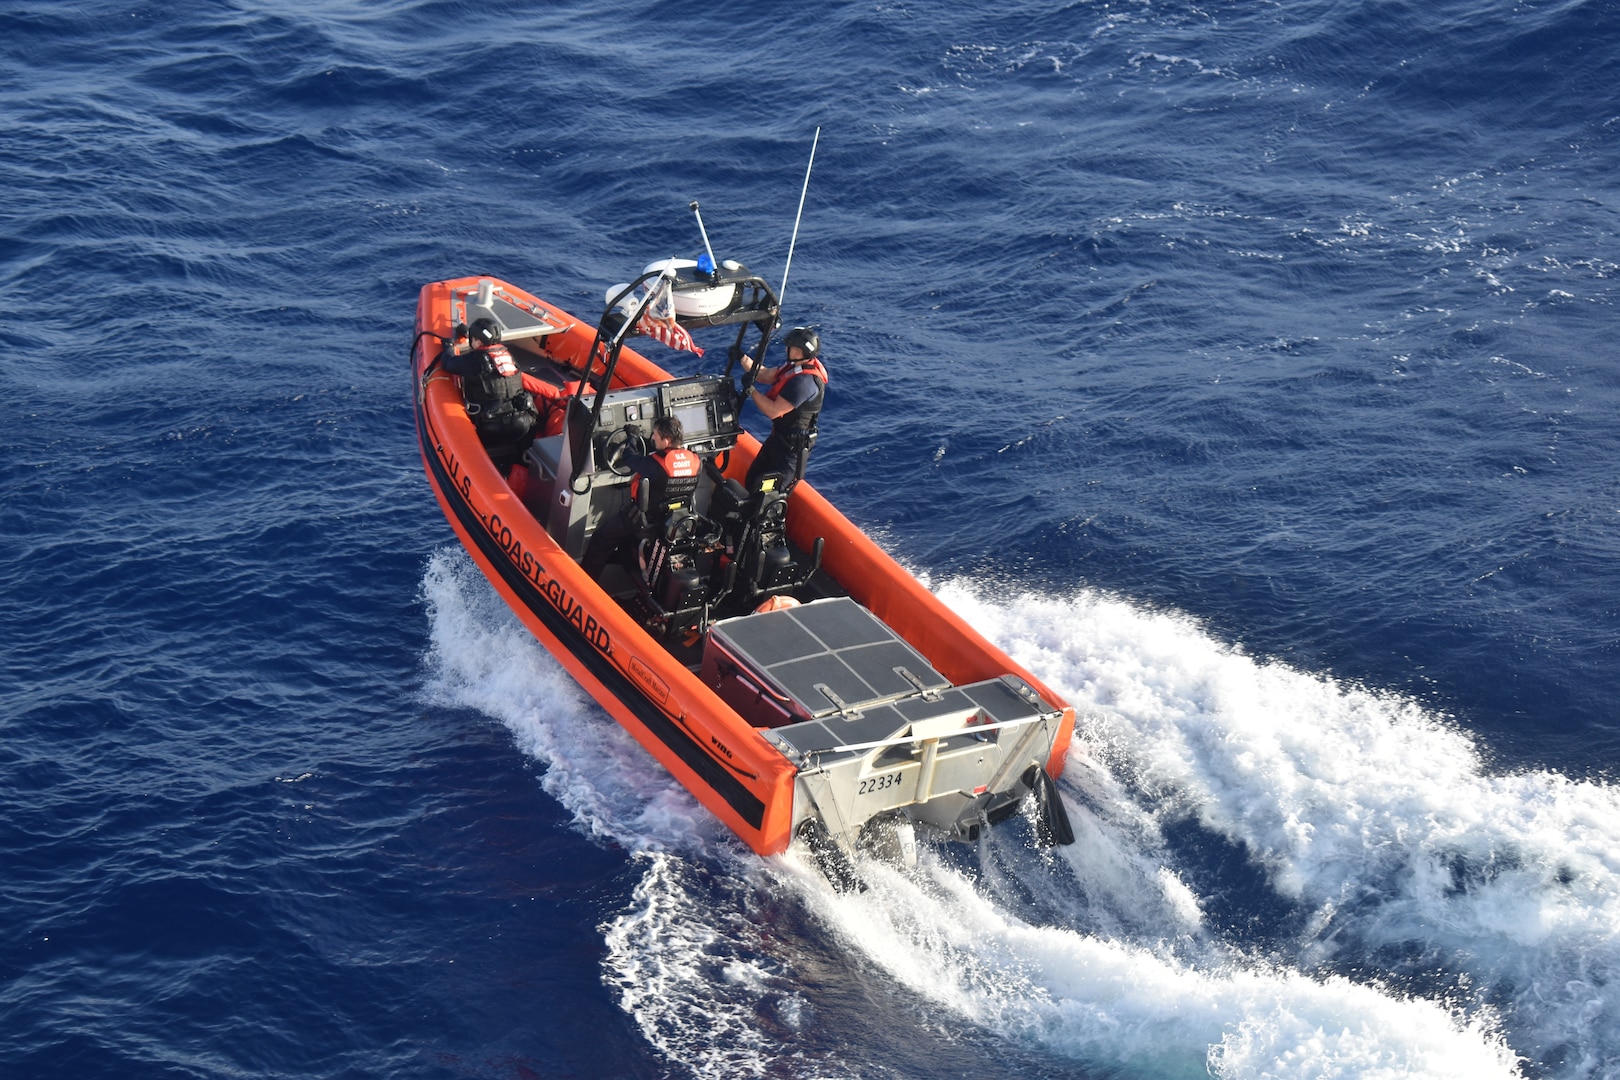 A Coast Guard small boat crew assigned to the U.S. Coast Guard Cutter Resolute (WMEC 620) gets underway in the North Caribbean Sea, July 15, 2023, Resolute was deployed in support of Homeland Security Task Force Southeast and Operation Vigilant Sentry to conduct migrant interdiction, deterrence, and maritime safety and security missions. (U.S. Coast Guard photo by Petty Officer 1st Class David Deal)